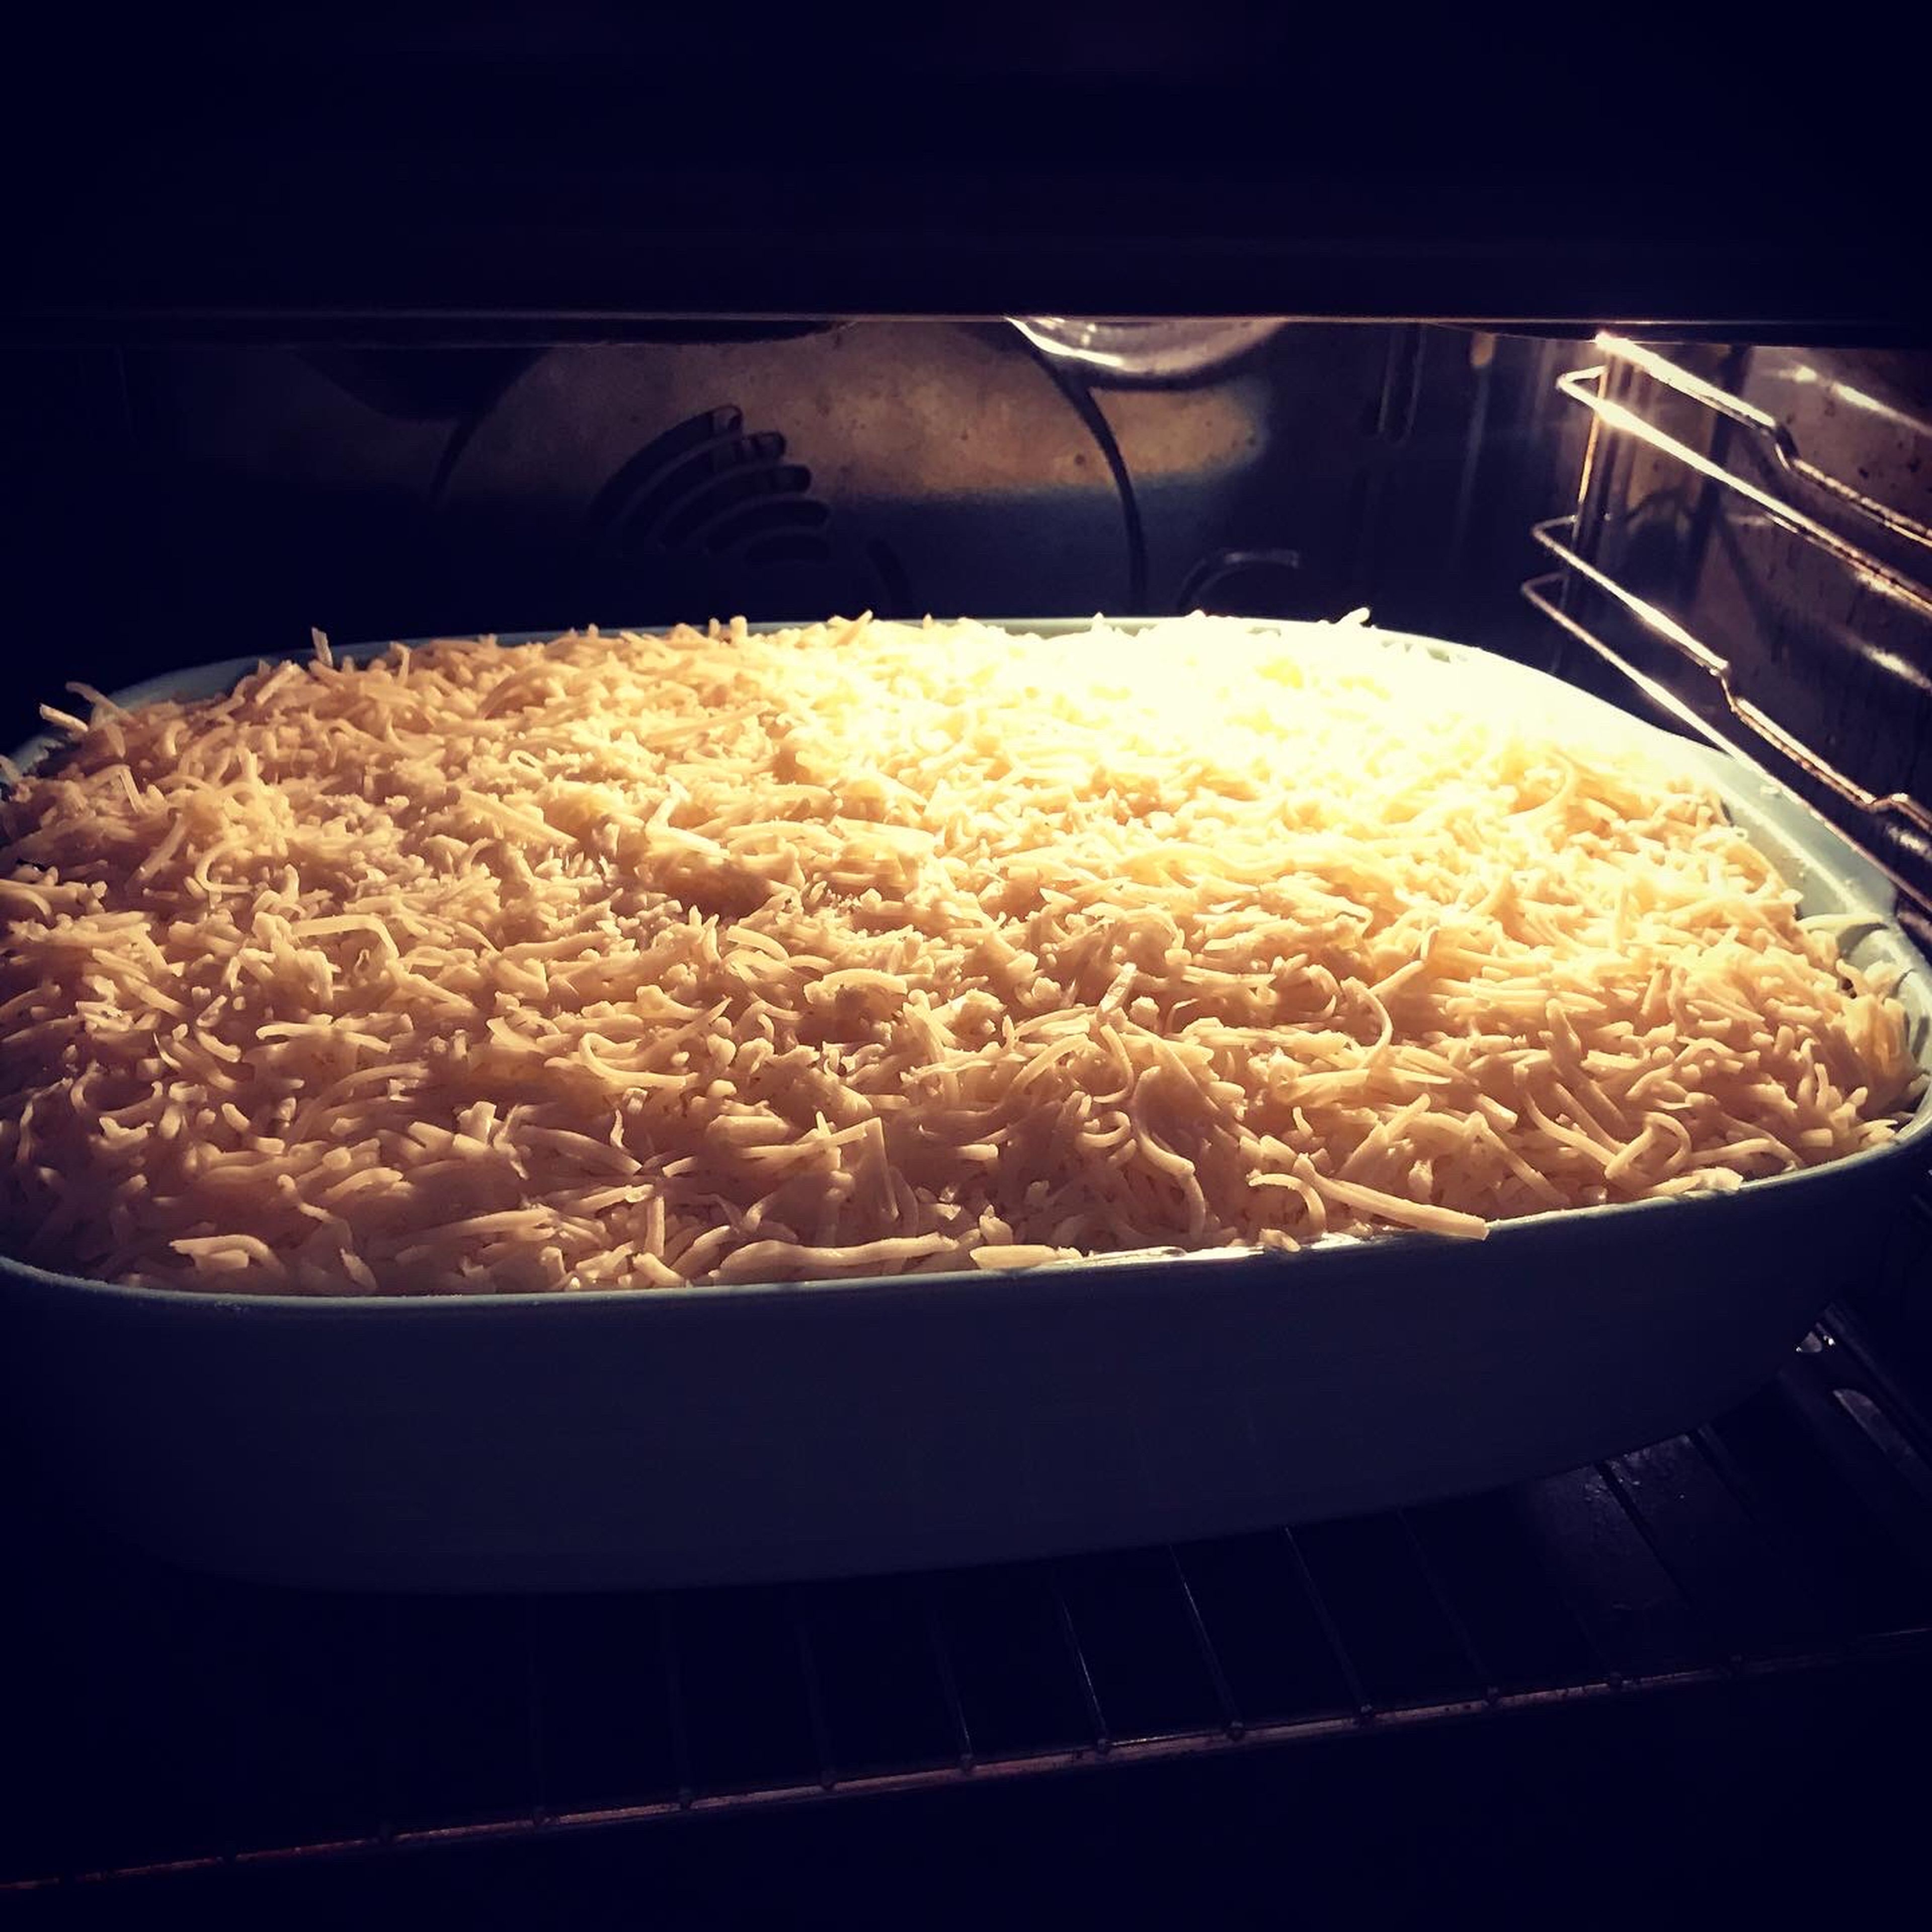 The last layer consists of pasta, béchamel and cheese. Mix the cheese beforehand in a bowl so you get the same flavor everywhere. Then spread evenly over the bechamel.